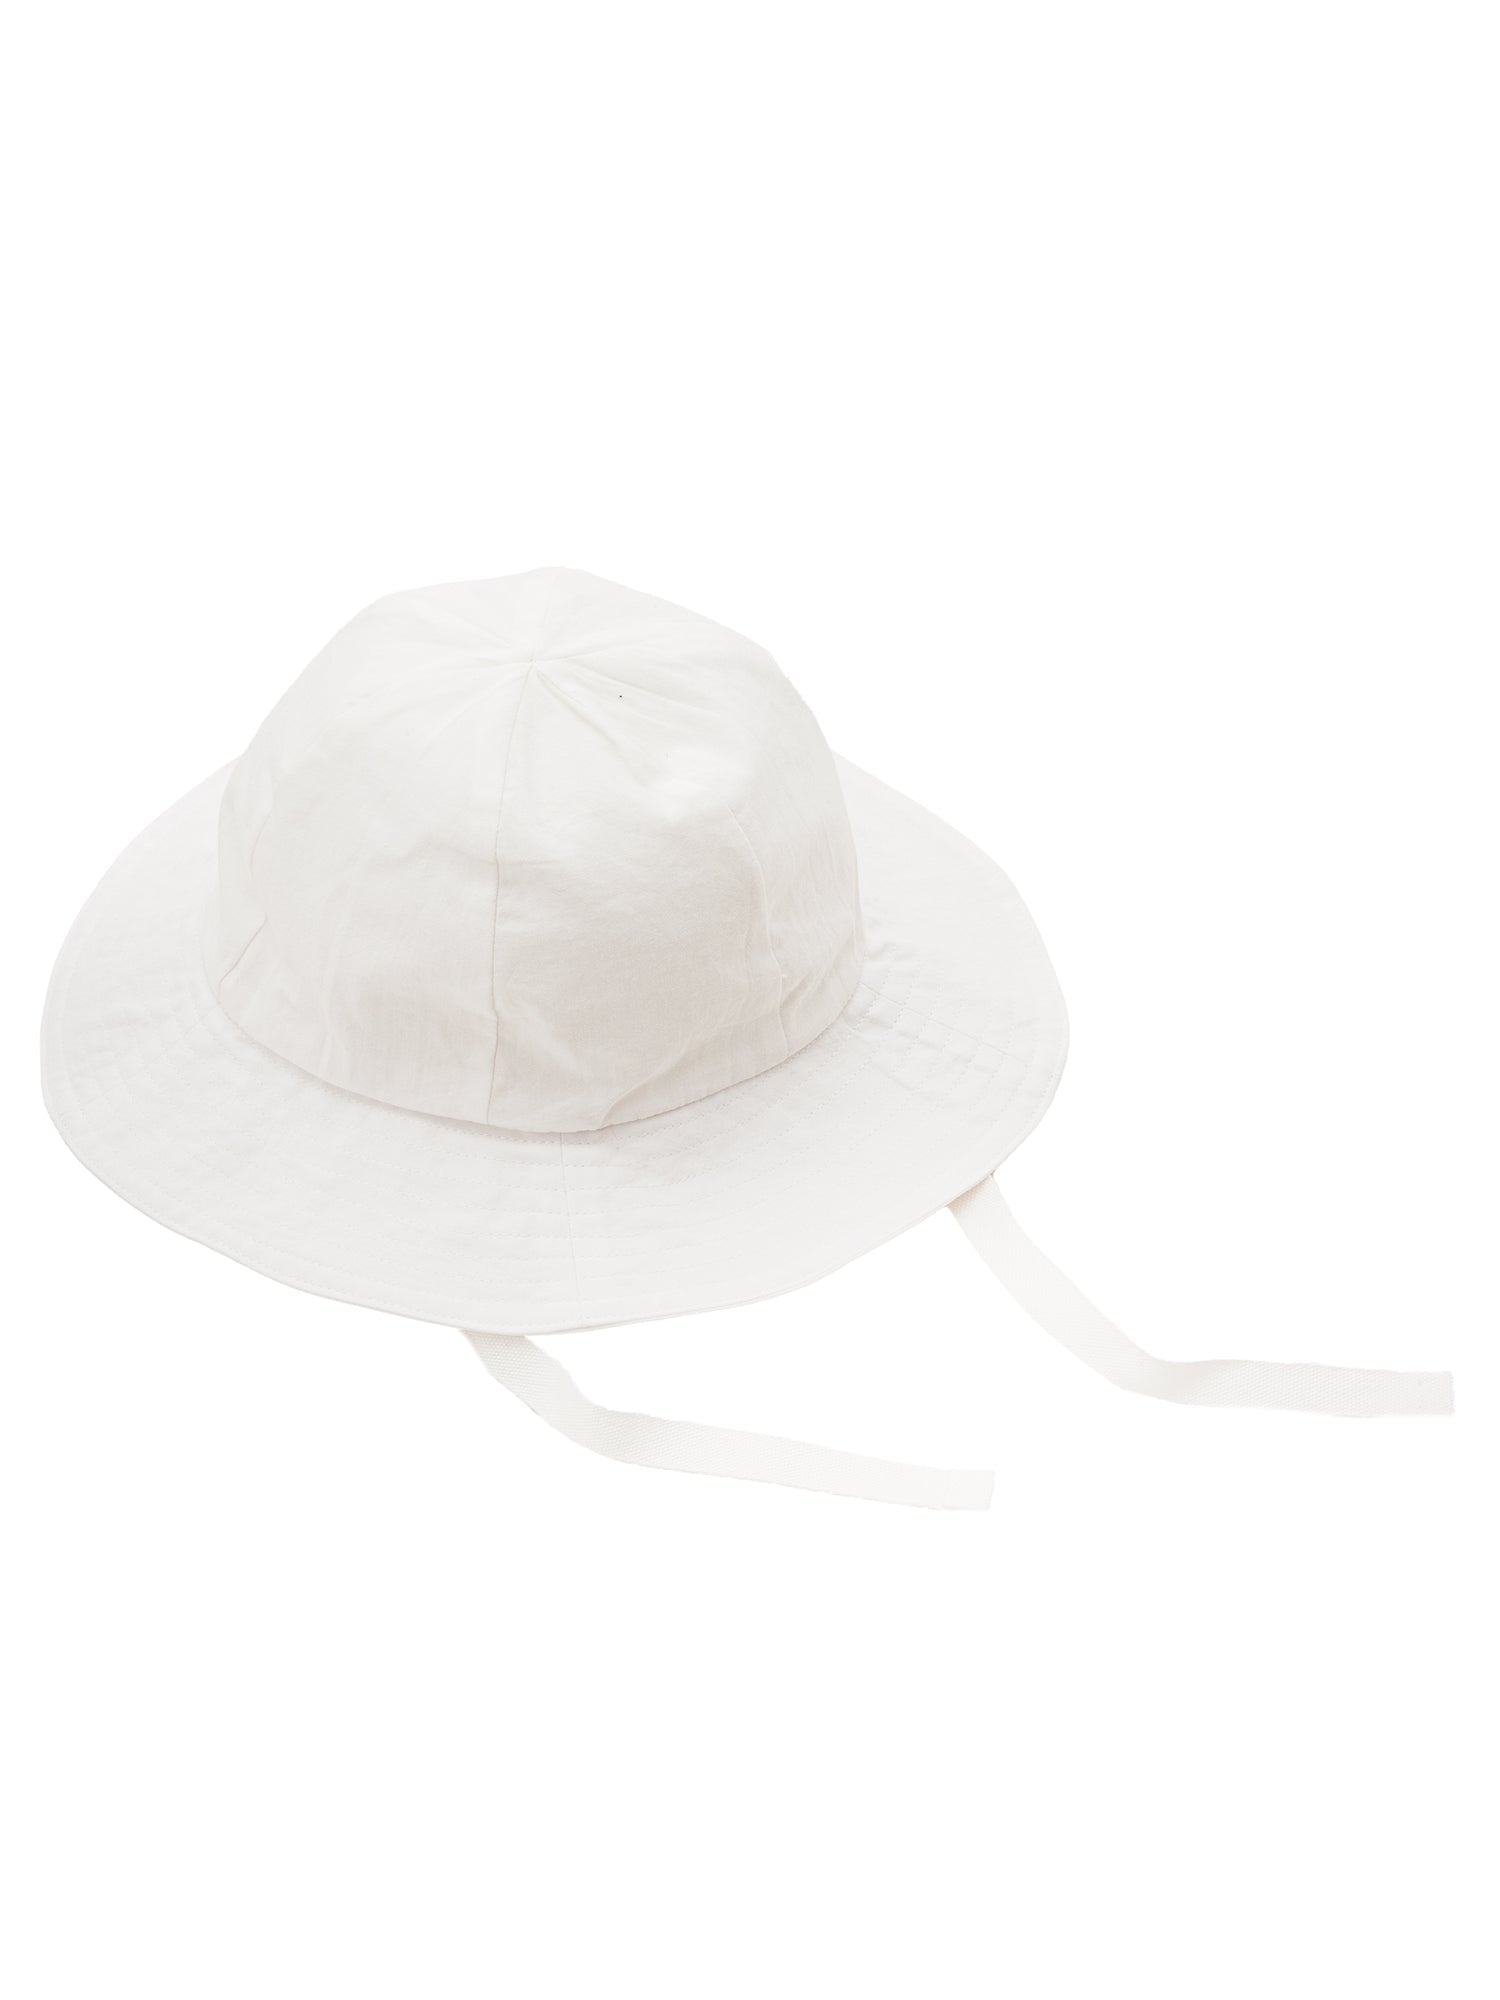 T-Models Kids Fisherman Hat Child Sun Protection Cap with India